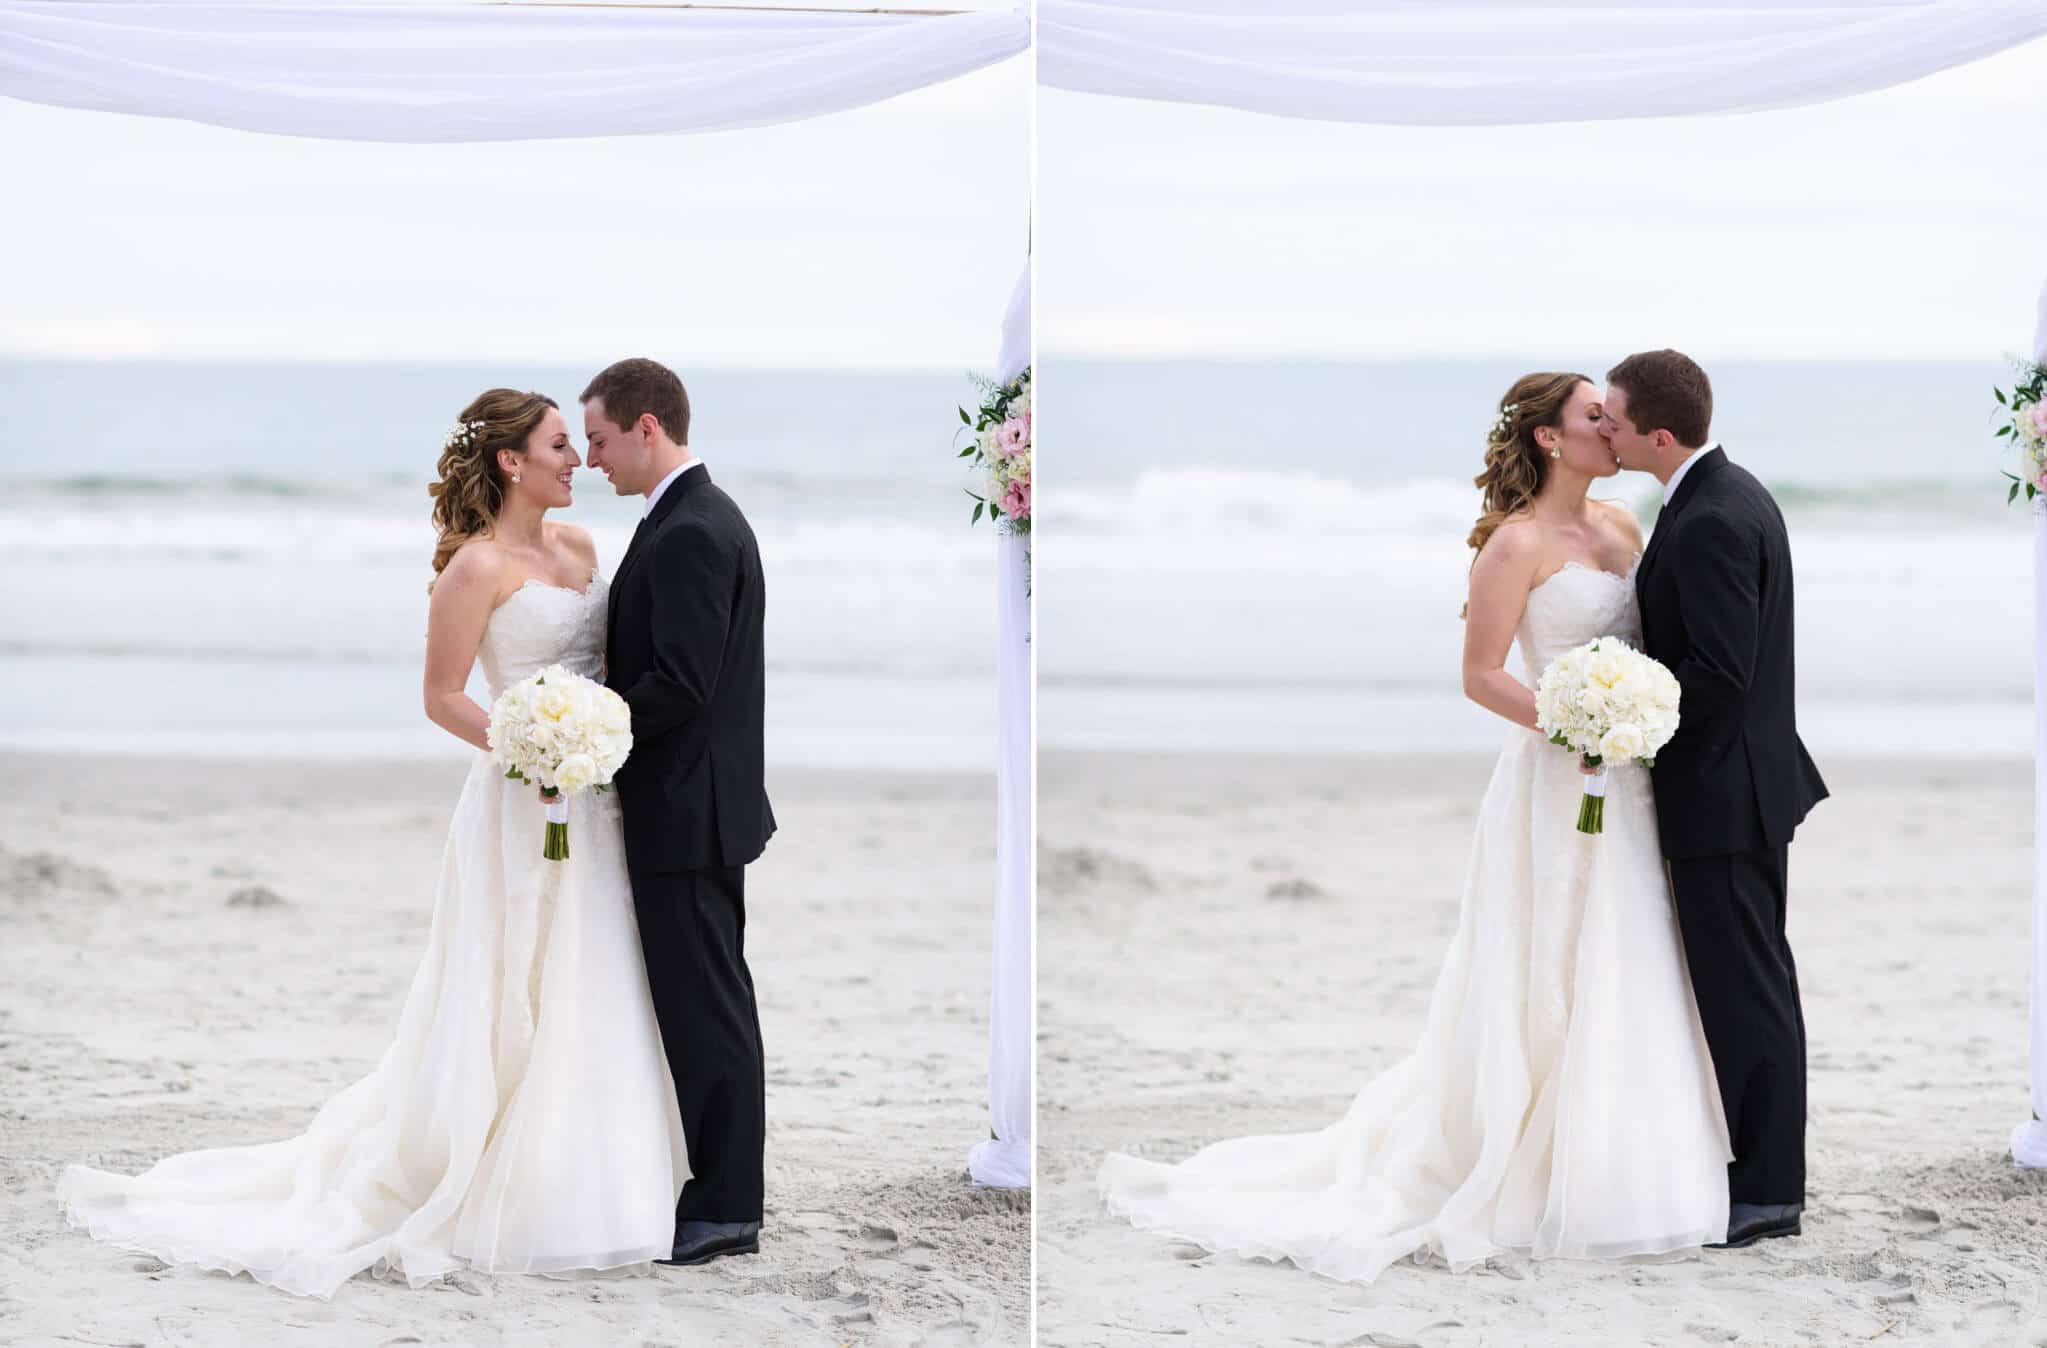 Kiss in front of the ocean